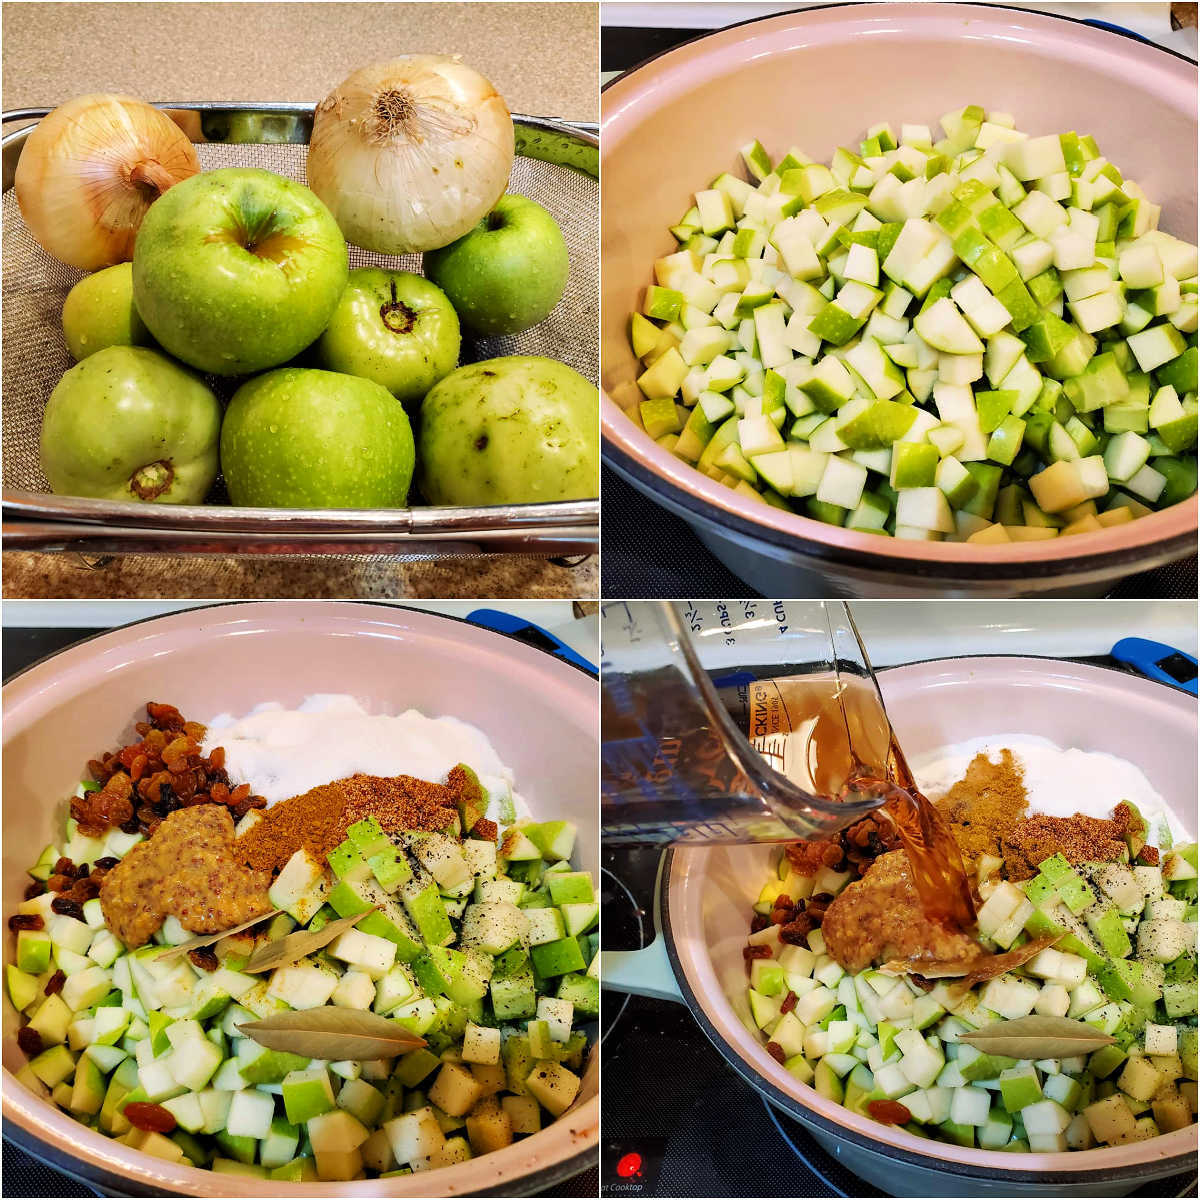 A collage of 4 images: whole apples, tomatoes, and onions, the fruits and vegetables diced in a large pot, all the spices and flavorings on top of the apples and onions, and pouring in the vinegar and the water.